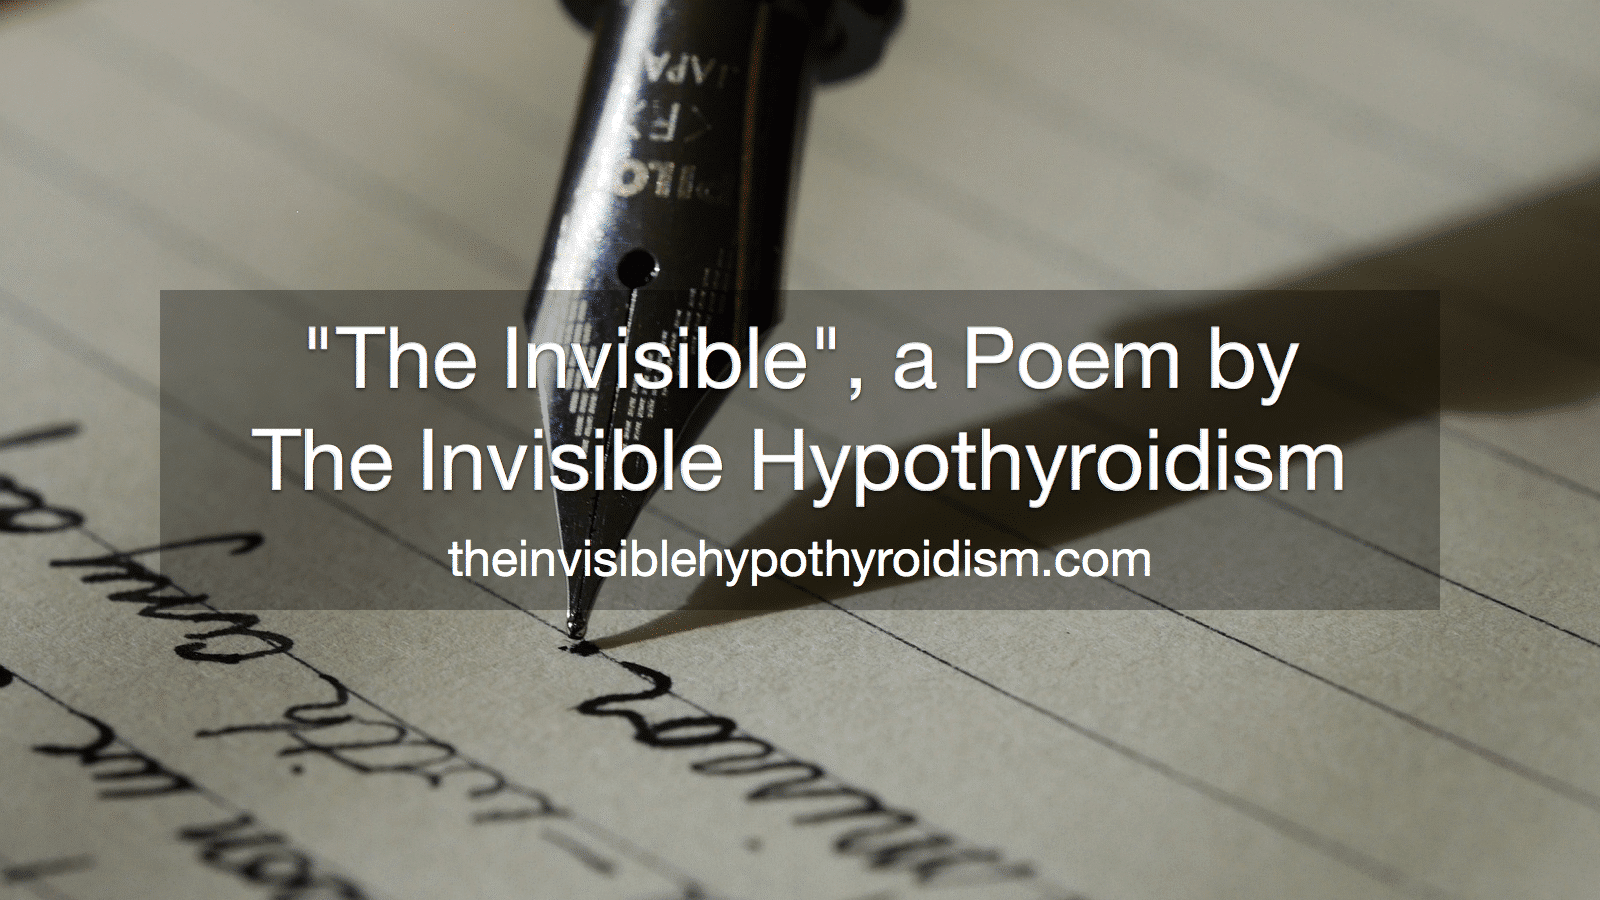 The Invisible, a Poem by The Invisible Hypothyroidism